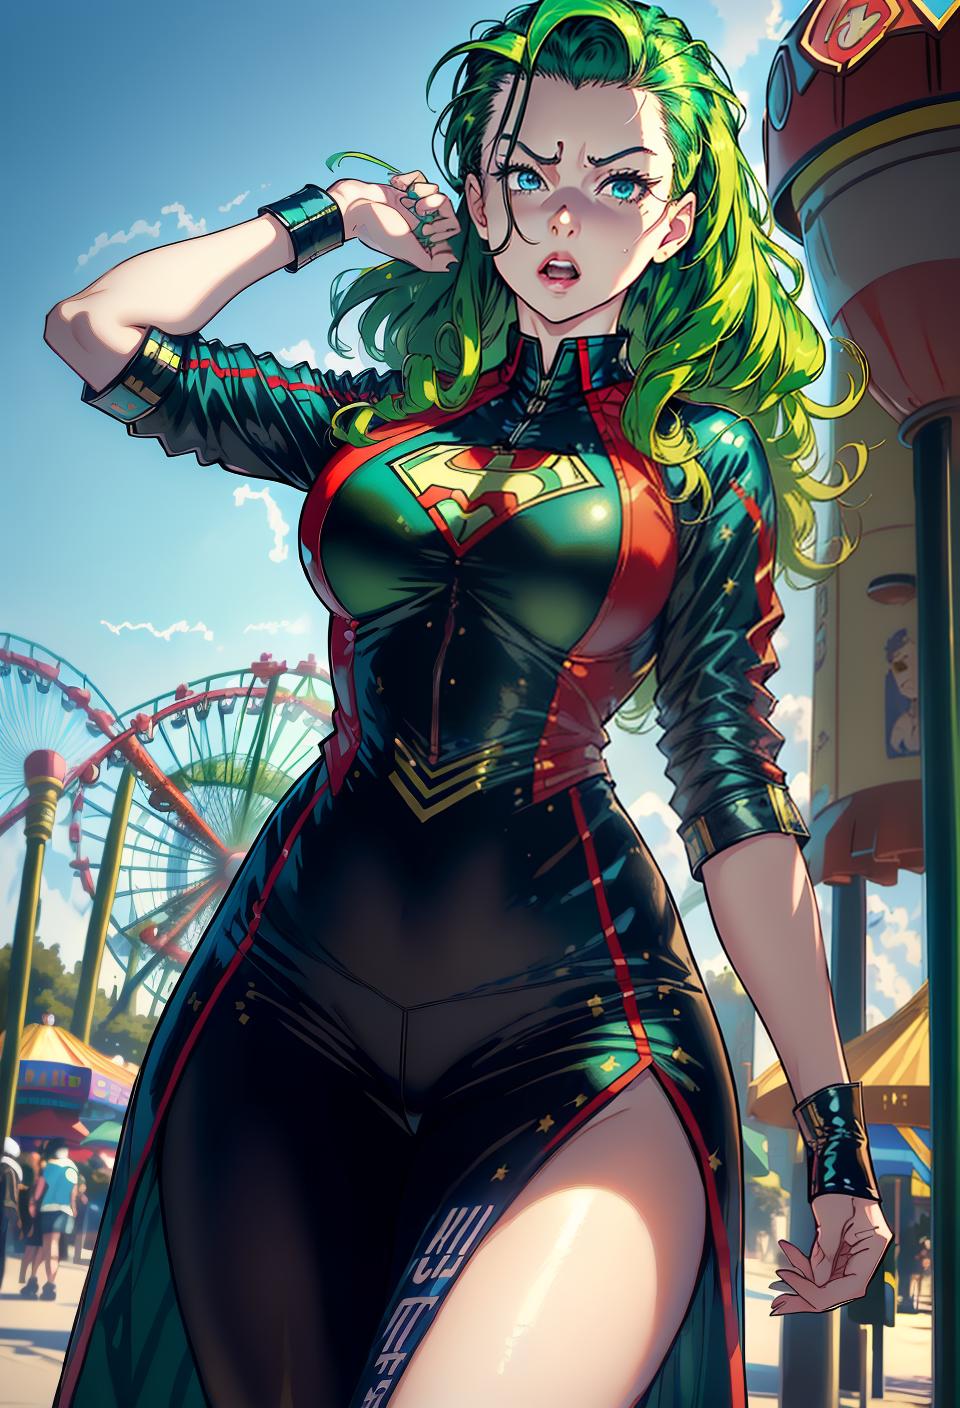  ((trending, highres, masterpiece, cinematic shot)), 1girl, mature, female superhero outfit, large, amusement park scene, medium-length wavy green hair, hair slicked back, large blue eyes, rational personality, surprised expression, very pale skin, orderly, observant